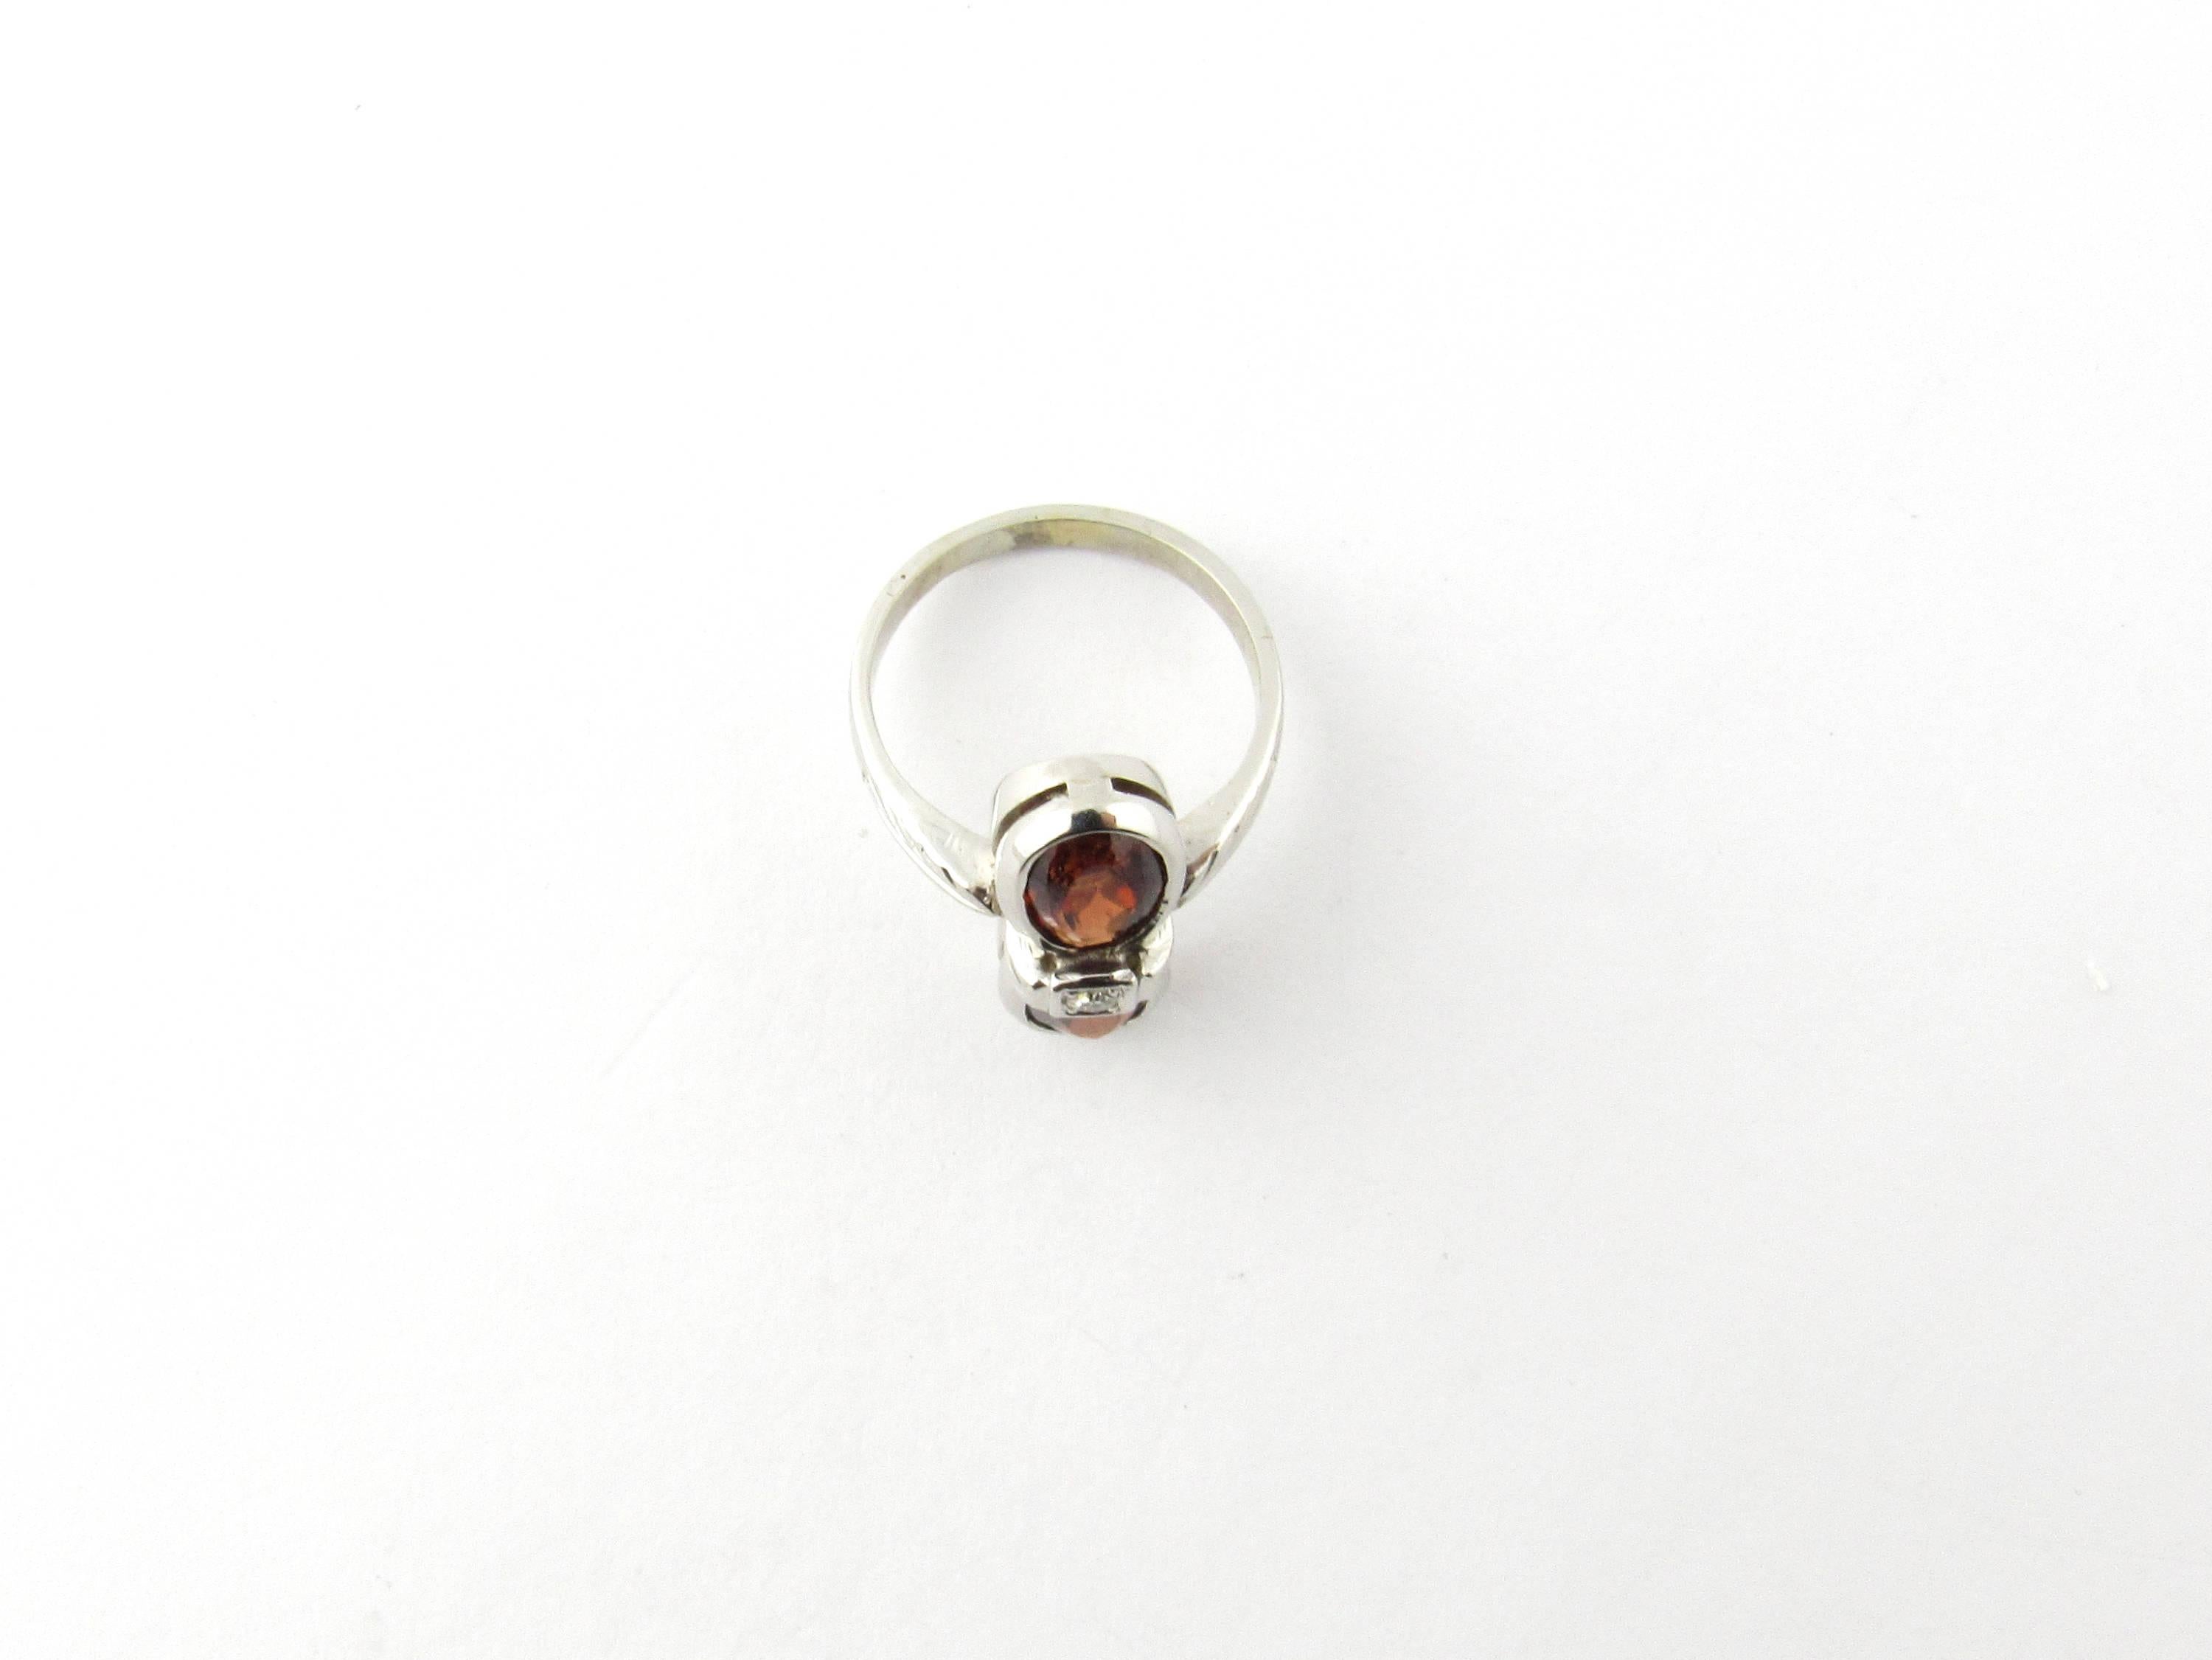 Vintage 14 Karat White Gold Garnet and Diamond Ring Size 5- 
This stunning ring features two oval garnet stones (7 mm x 6 mm each) accented with one sparkling single cut diamond and set in 14K white gold. Top of ring measures (18 mm x 7 mm). Shank 2